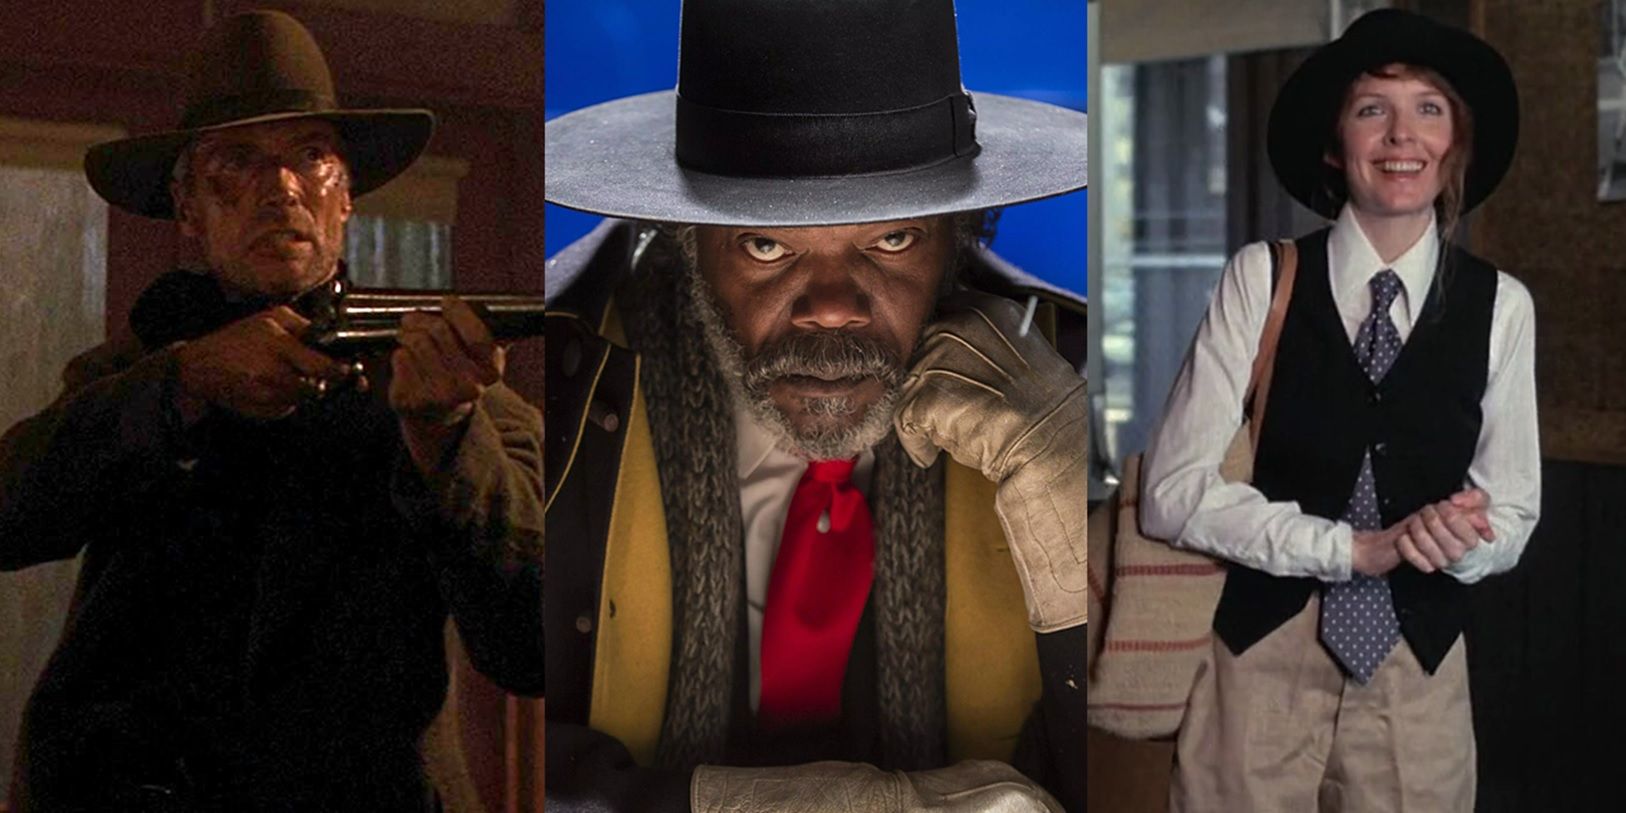 Clint Eastwood in Unforgiven, Samuel L Jackson in The Hateful Eight, and Diane Keaton in Annie Hall